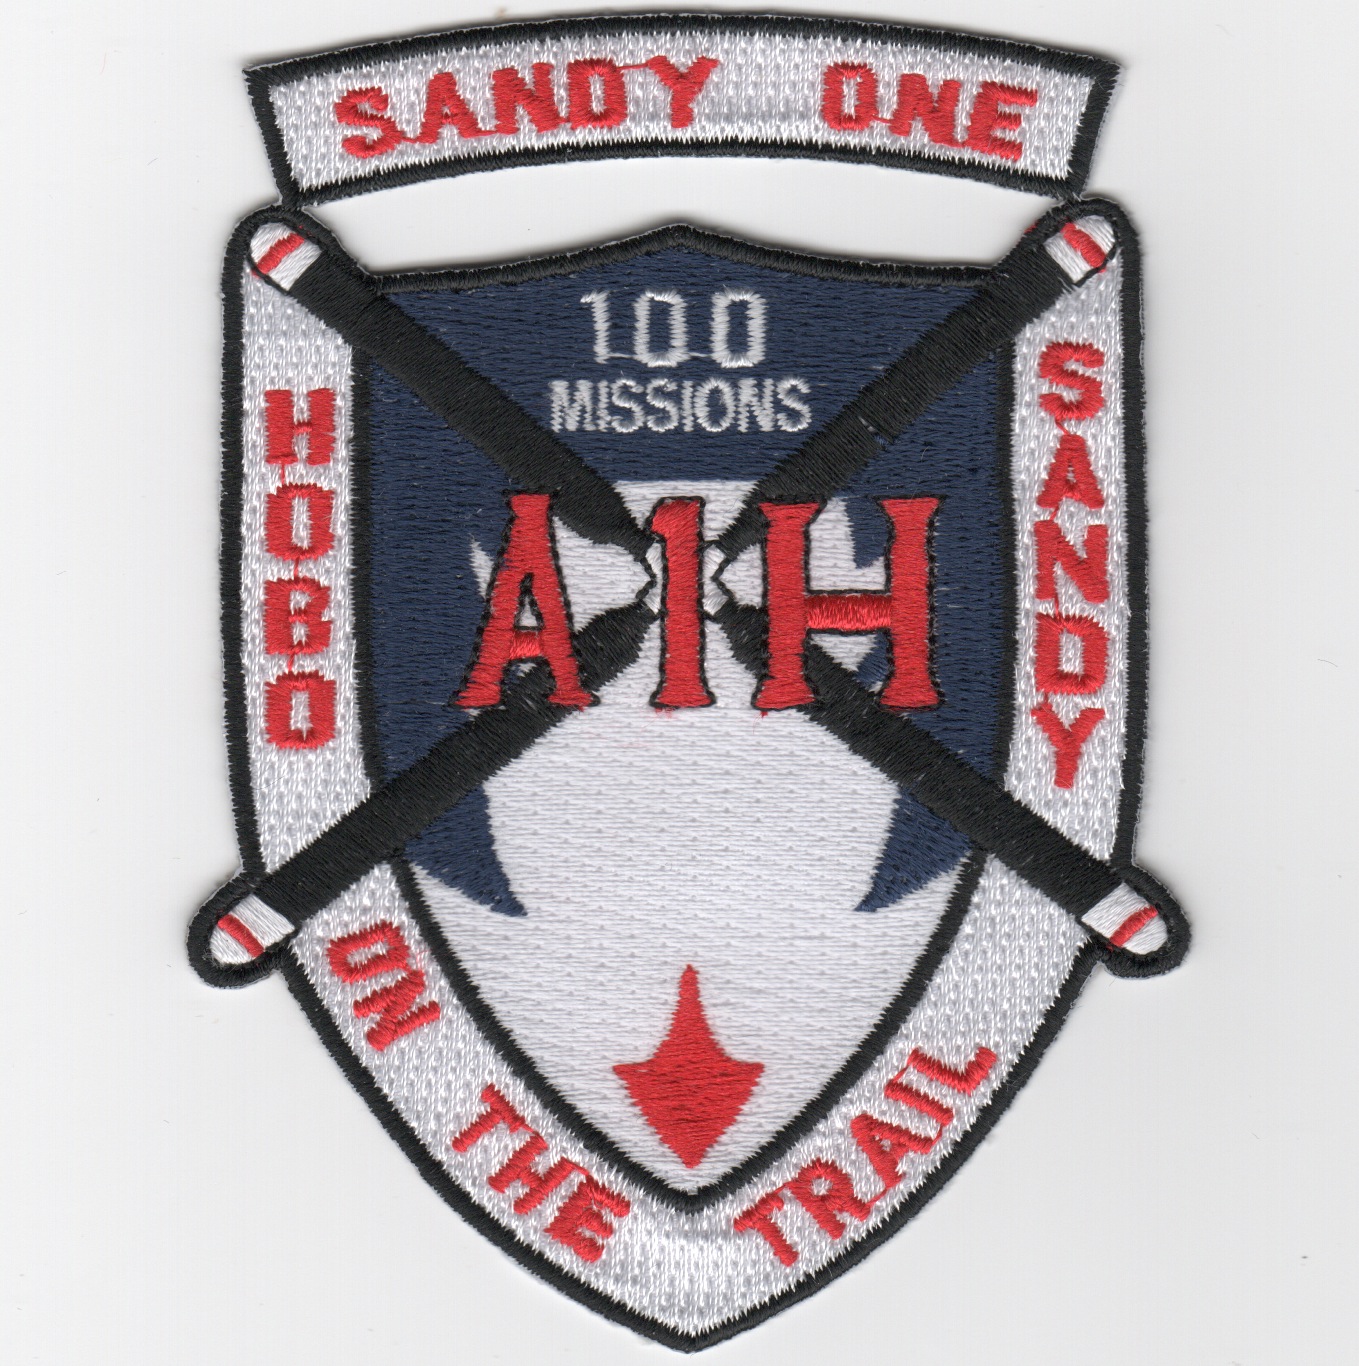 A-1H 'SANDY ONE' 100 Missions Patch